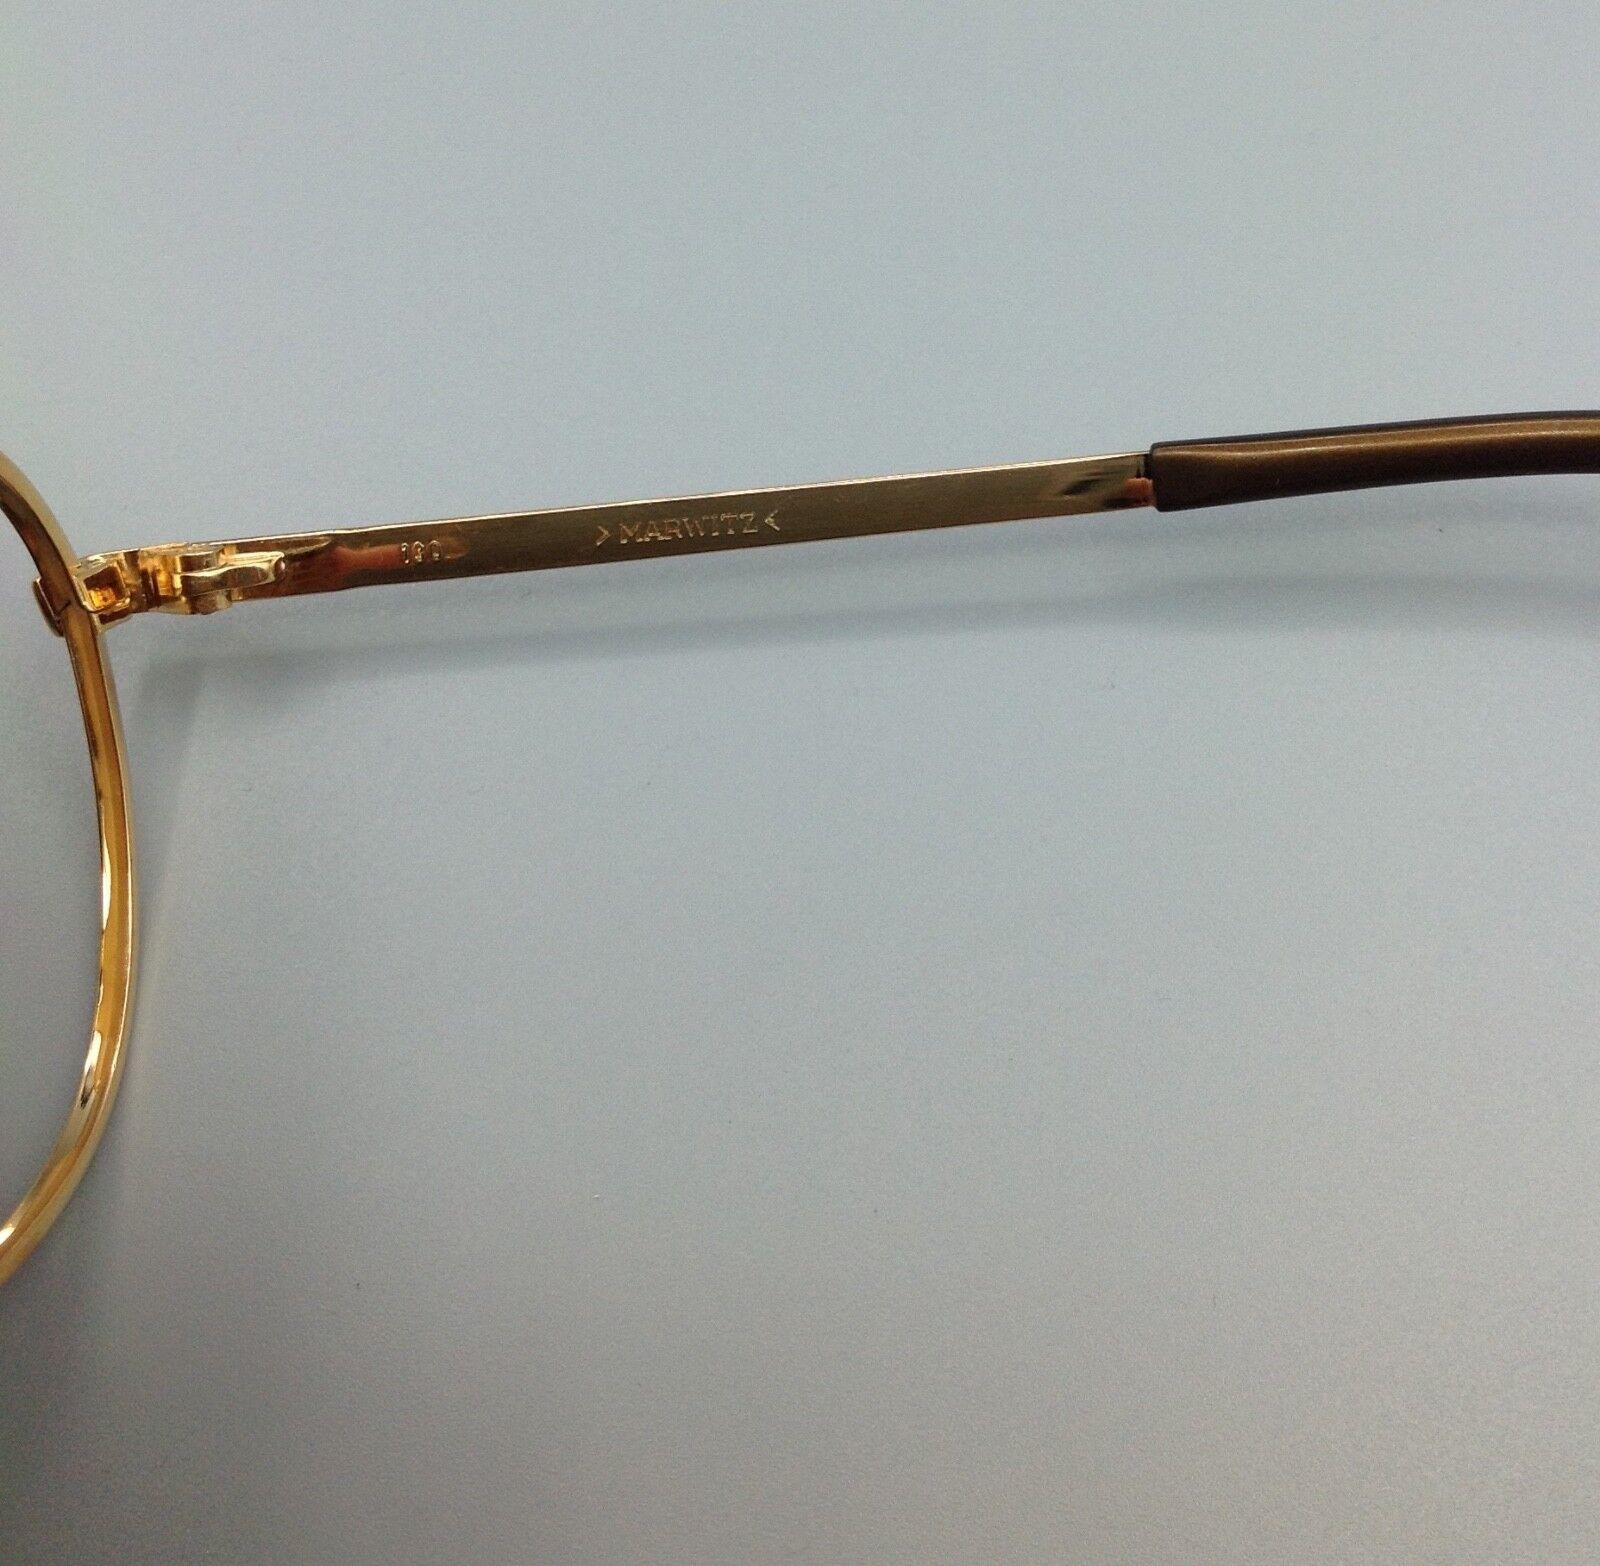 VINTAGE Marwitz 7806 BC2 cal.56 occhiali eyeglasses gold frame made in Germany